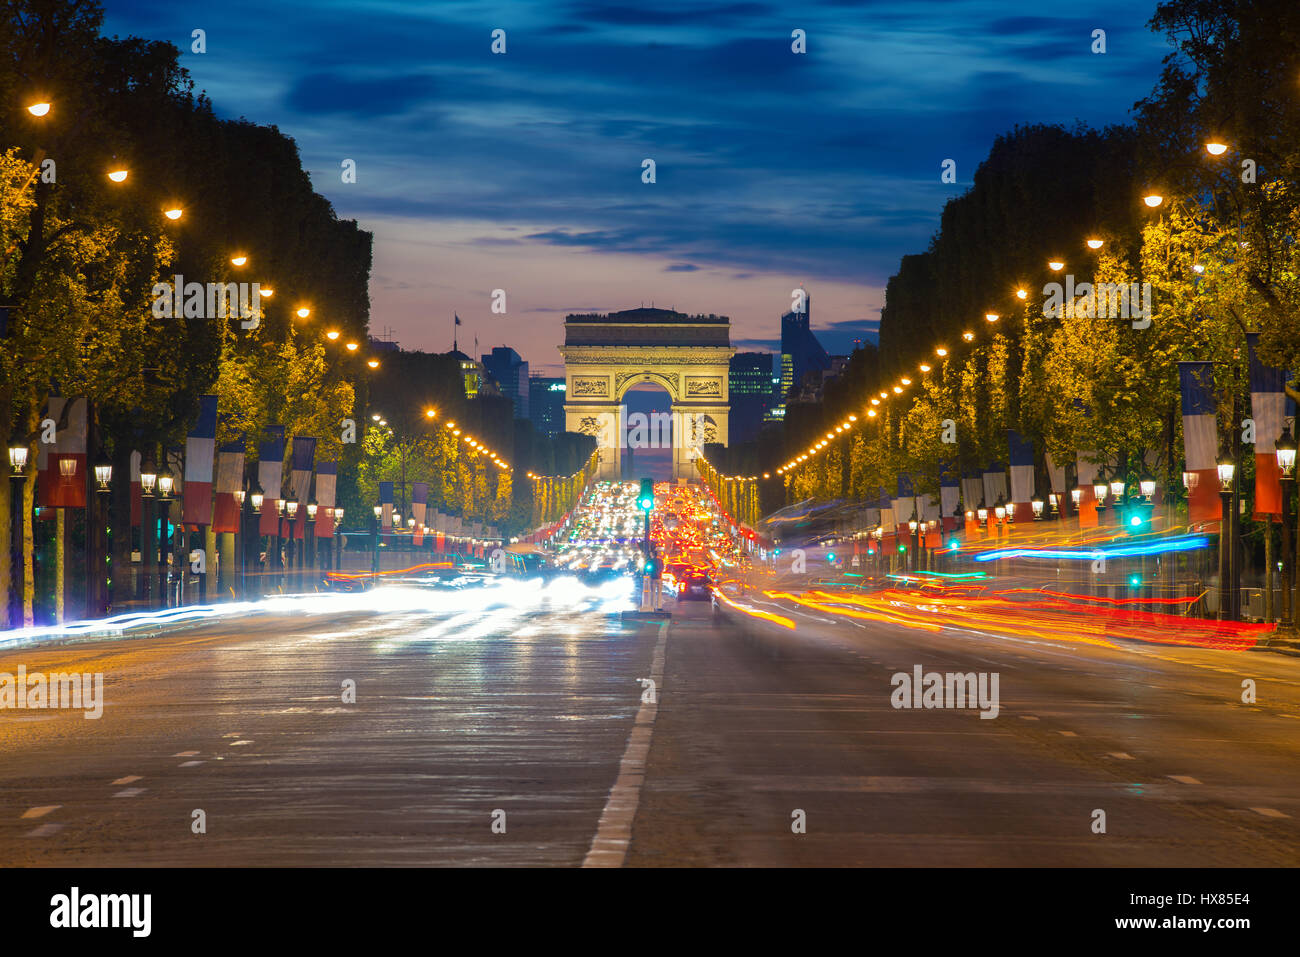 Night view of Paris traffic in Champs-Elysees street and the Arc de Triomphe in Paris, France. Stock Photo